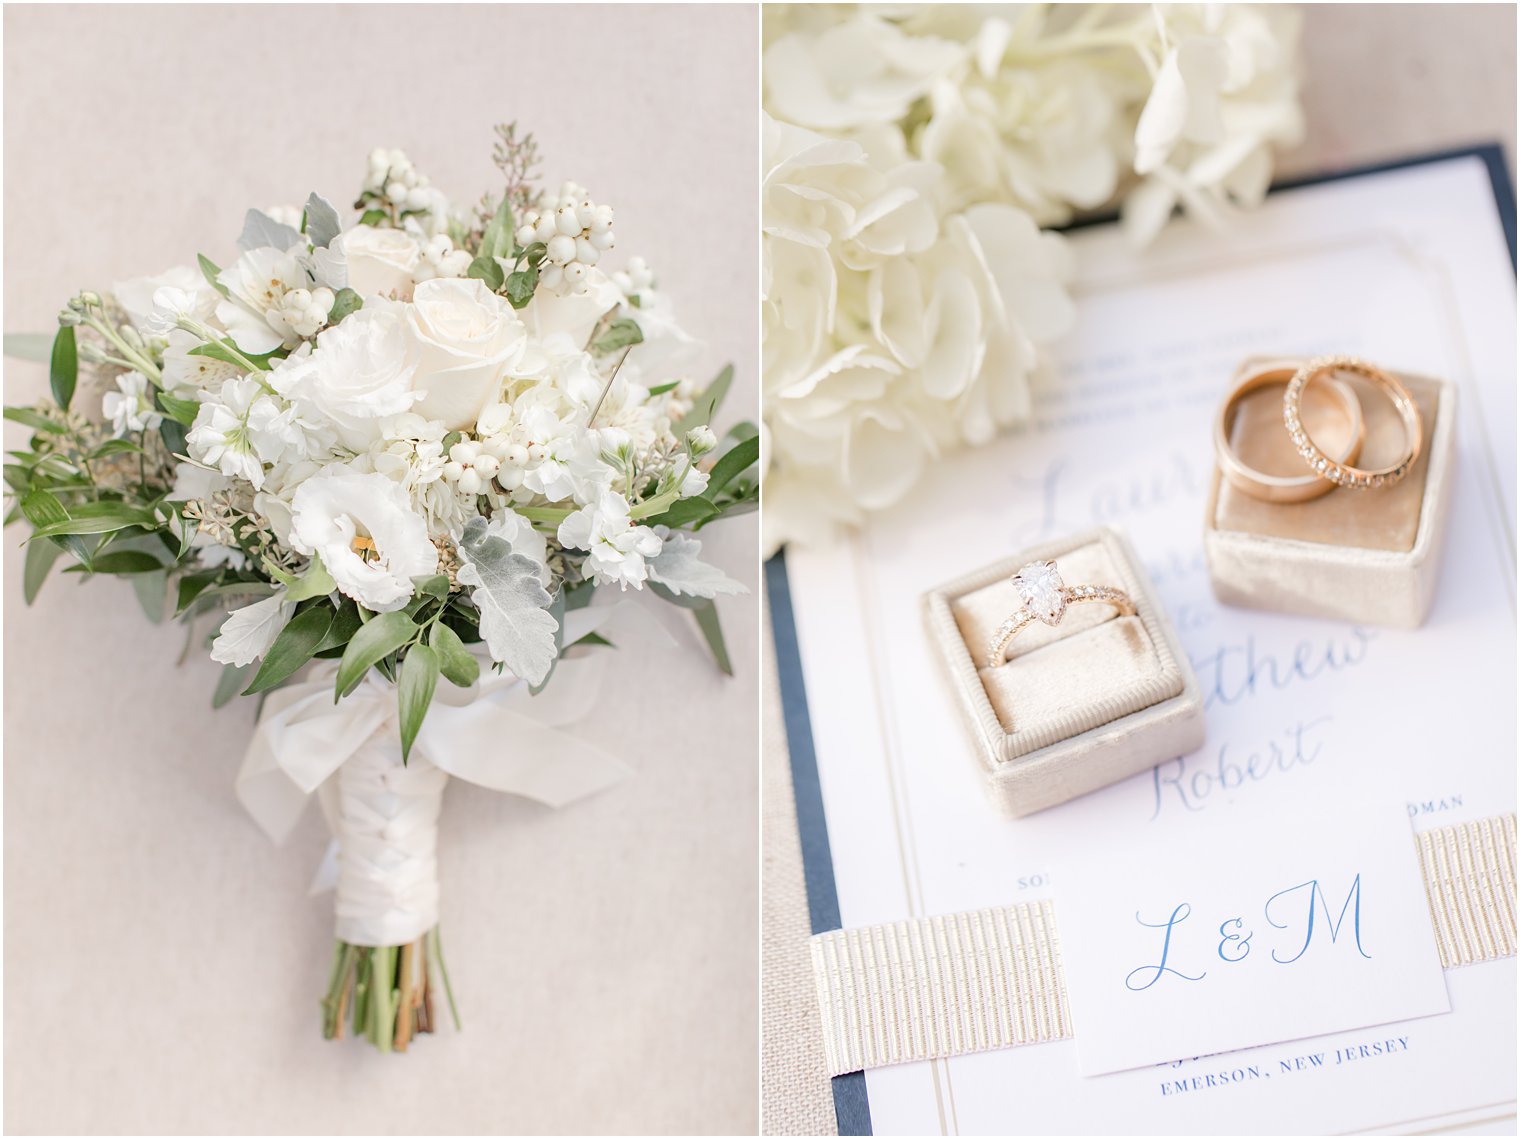 all-white wedding bouquet by Bassett Flowers photographed by Idalia Photography